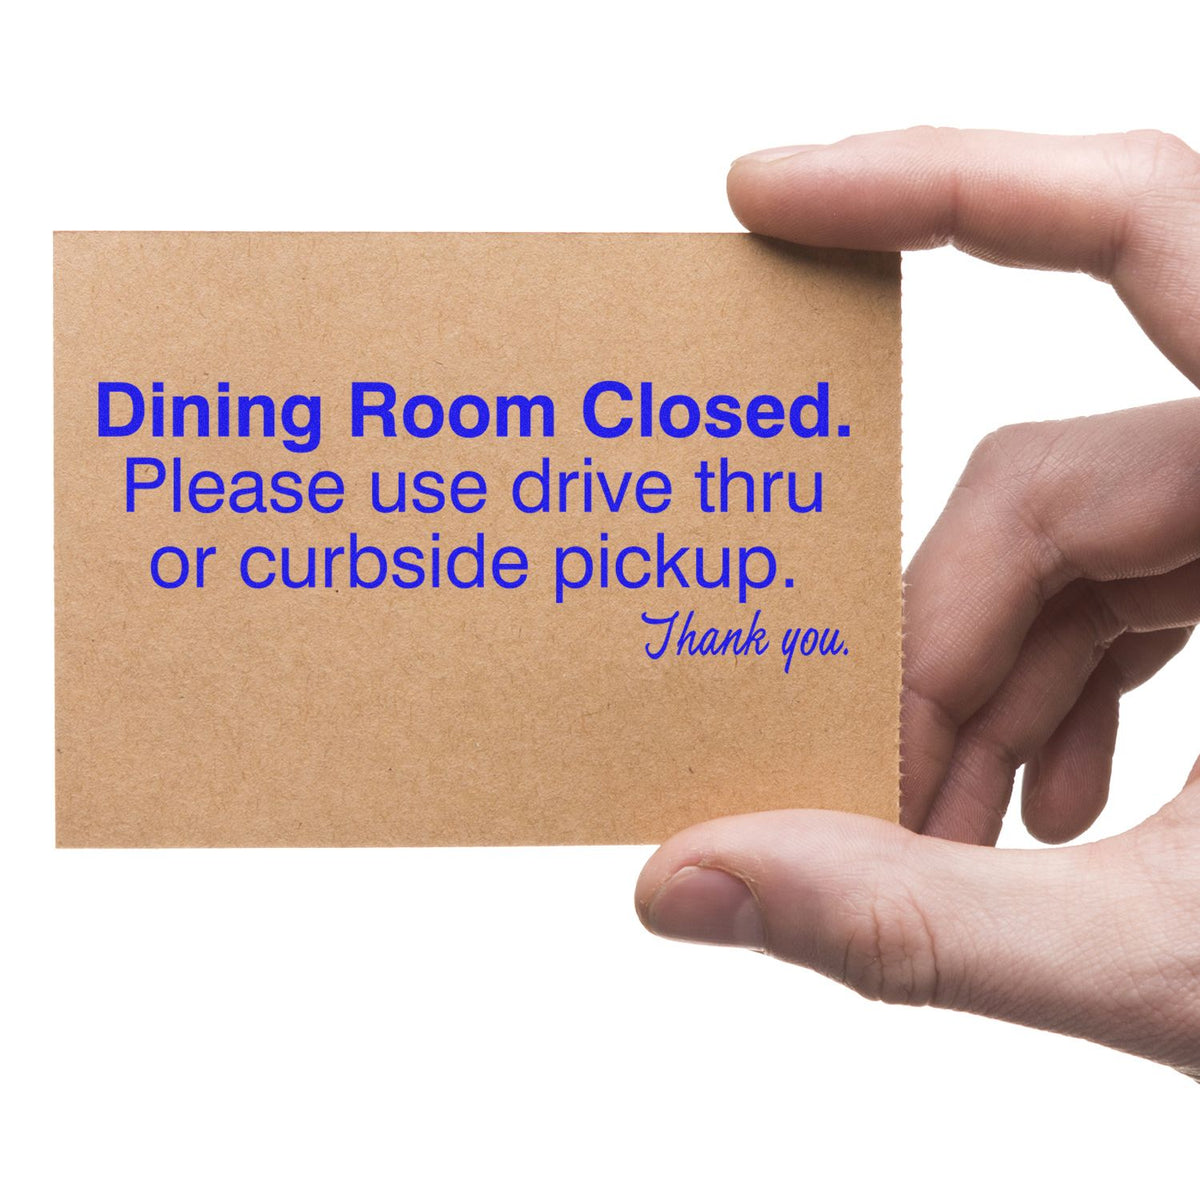 Dining Room Closed Rubber Stamp In Use Photo